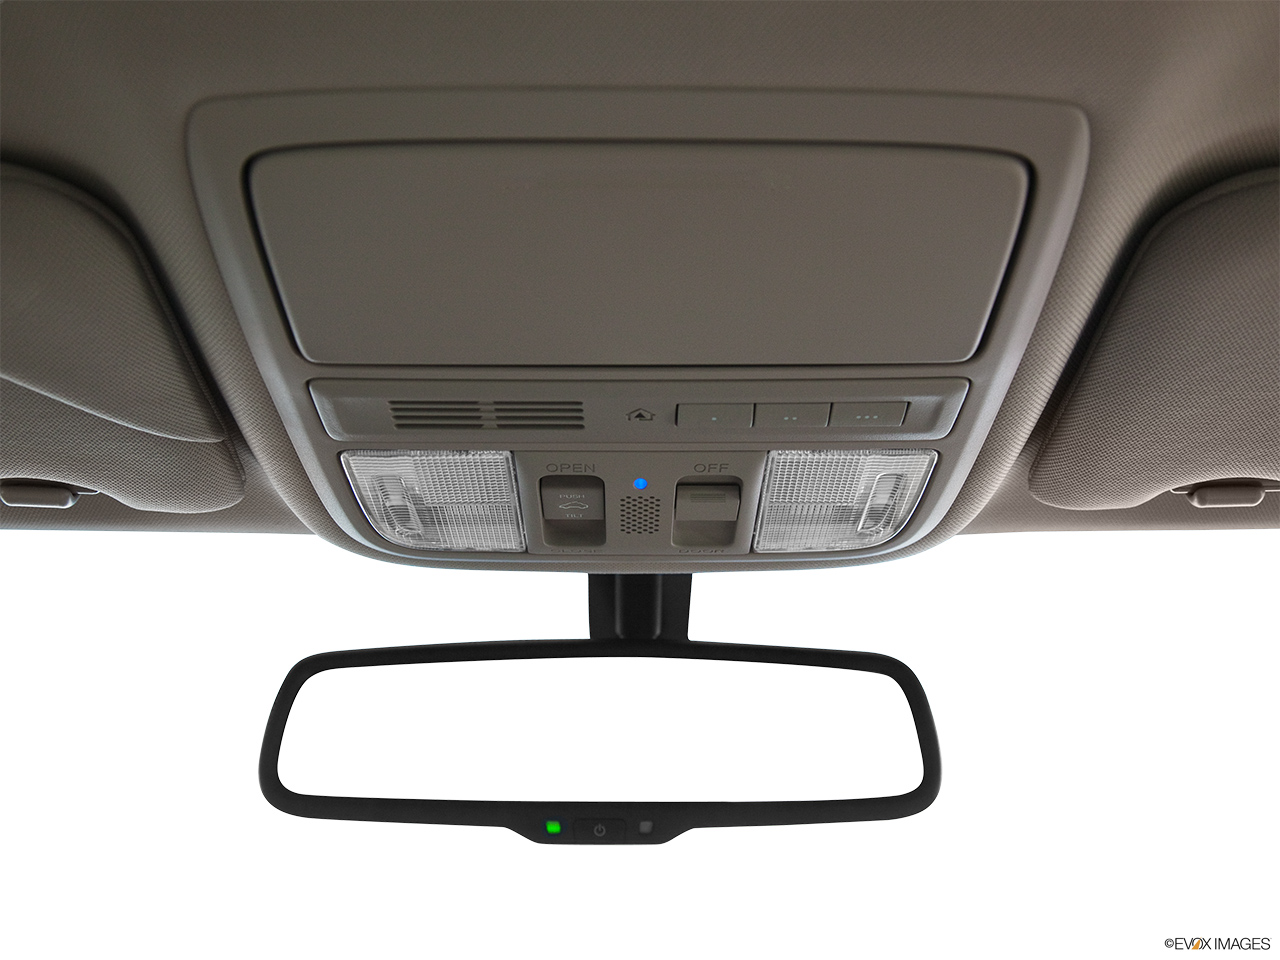 2012 Acura TSX Sport Wagon Courtesy lamps/ceiling controls. 